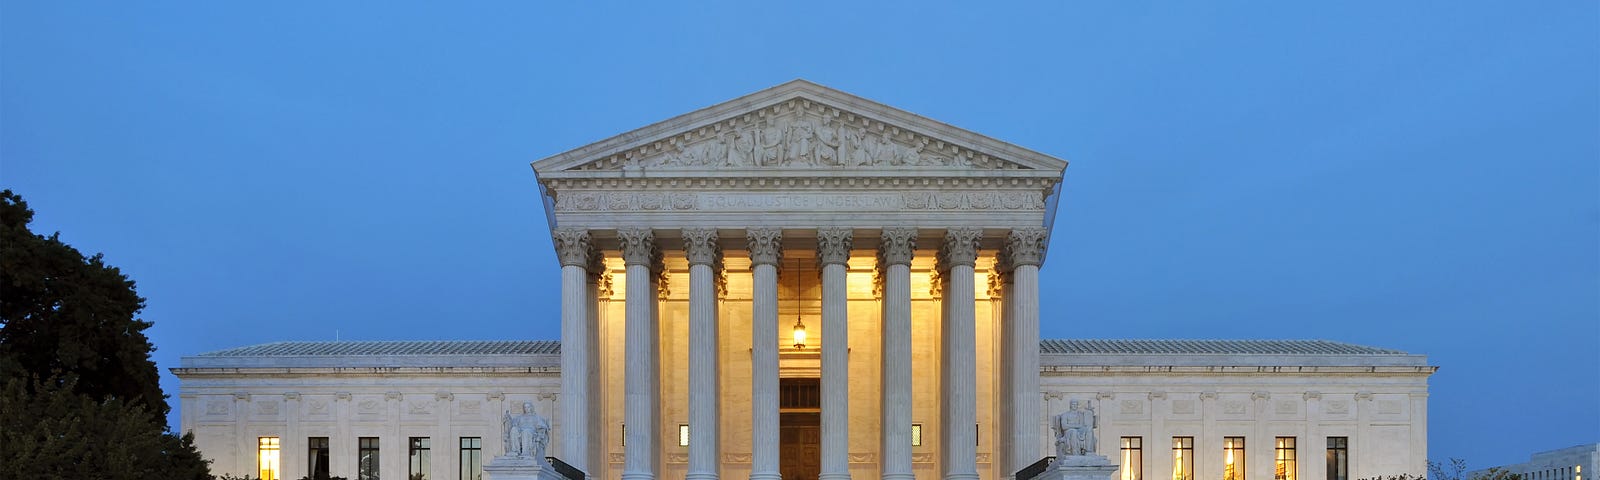 A panoramic photograph of the west facade of the Supreme Court of the United States building in Washington, DC, at dusk